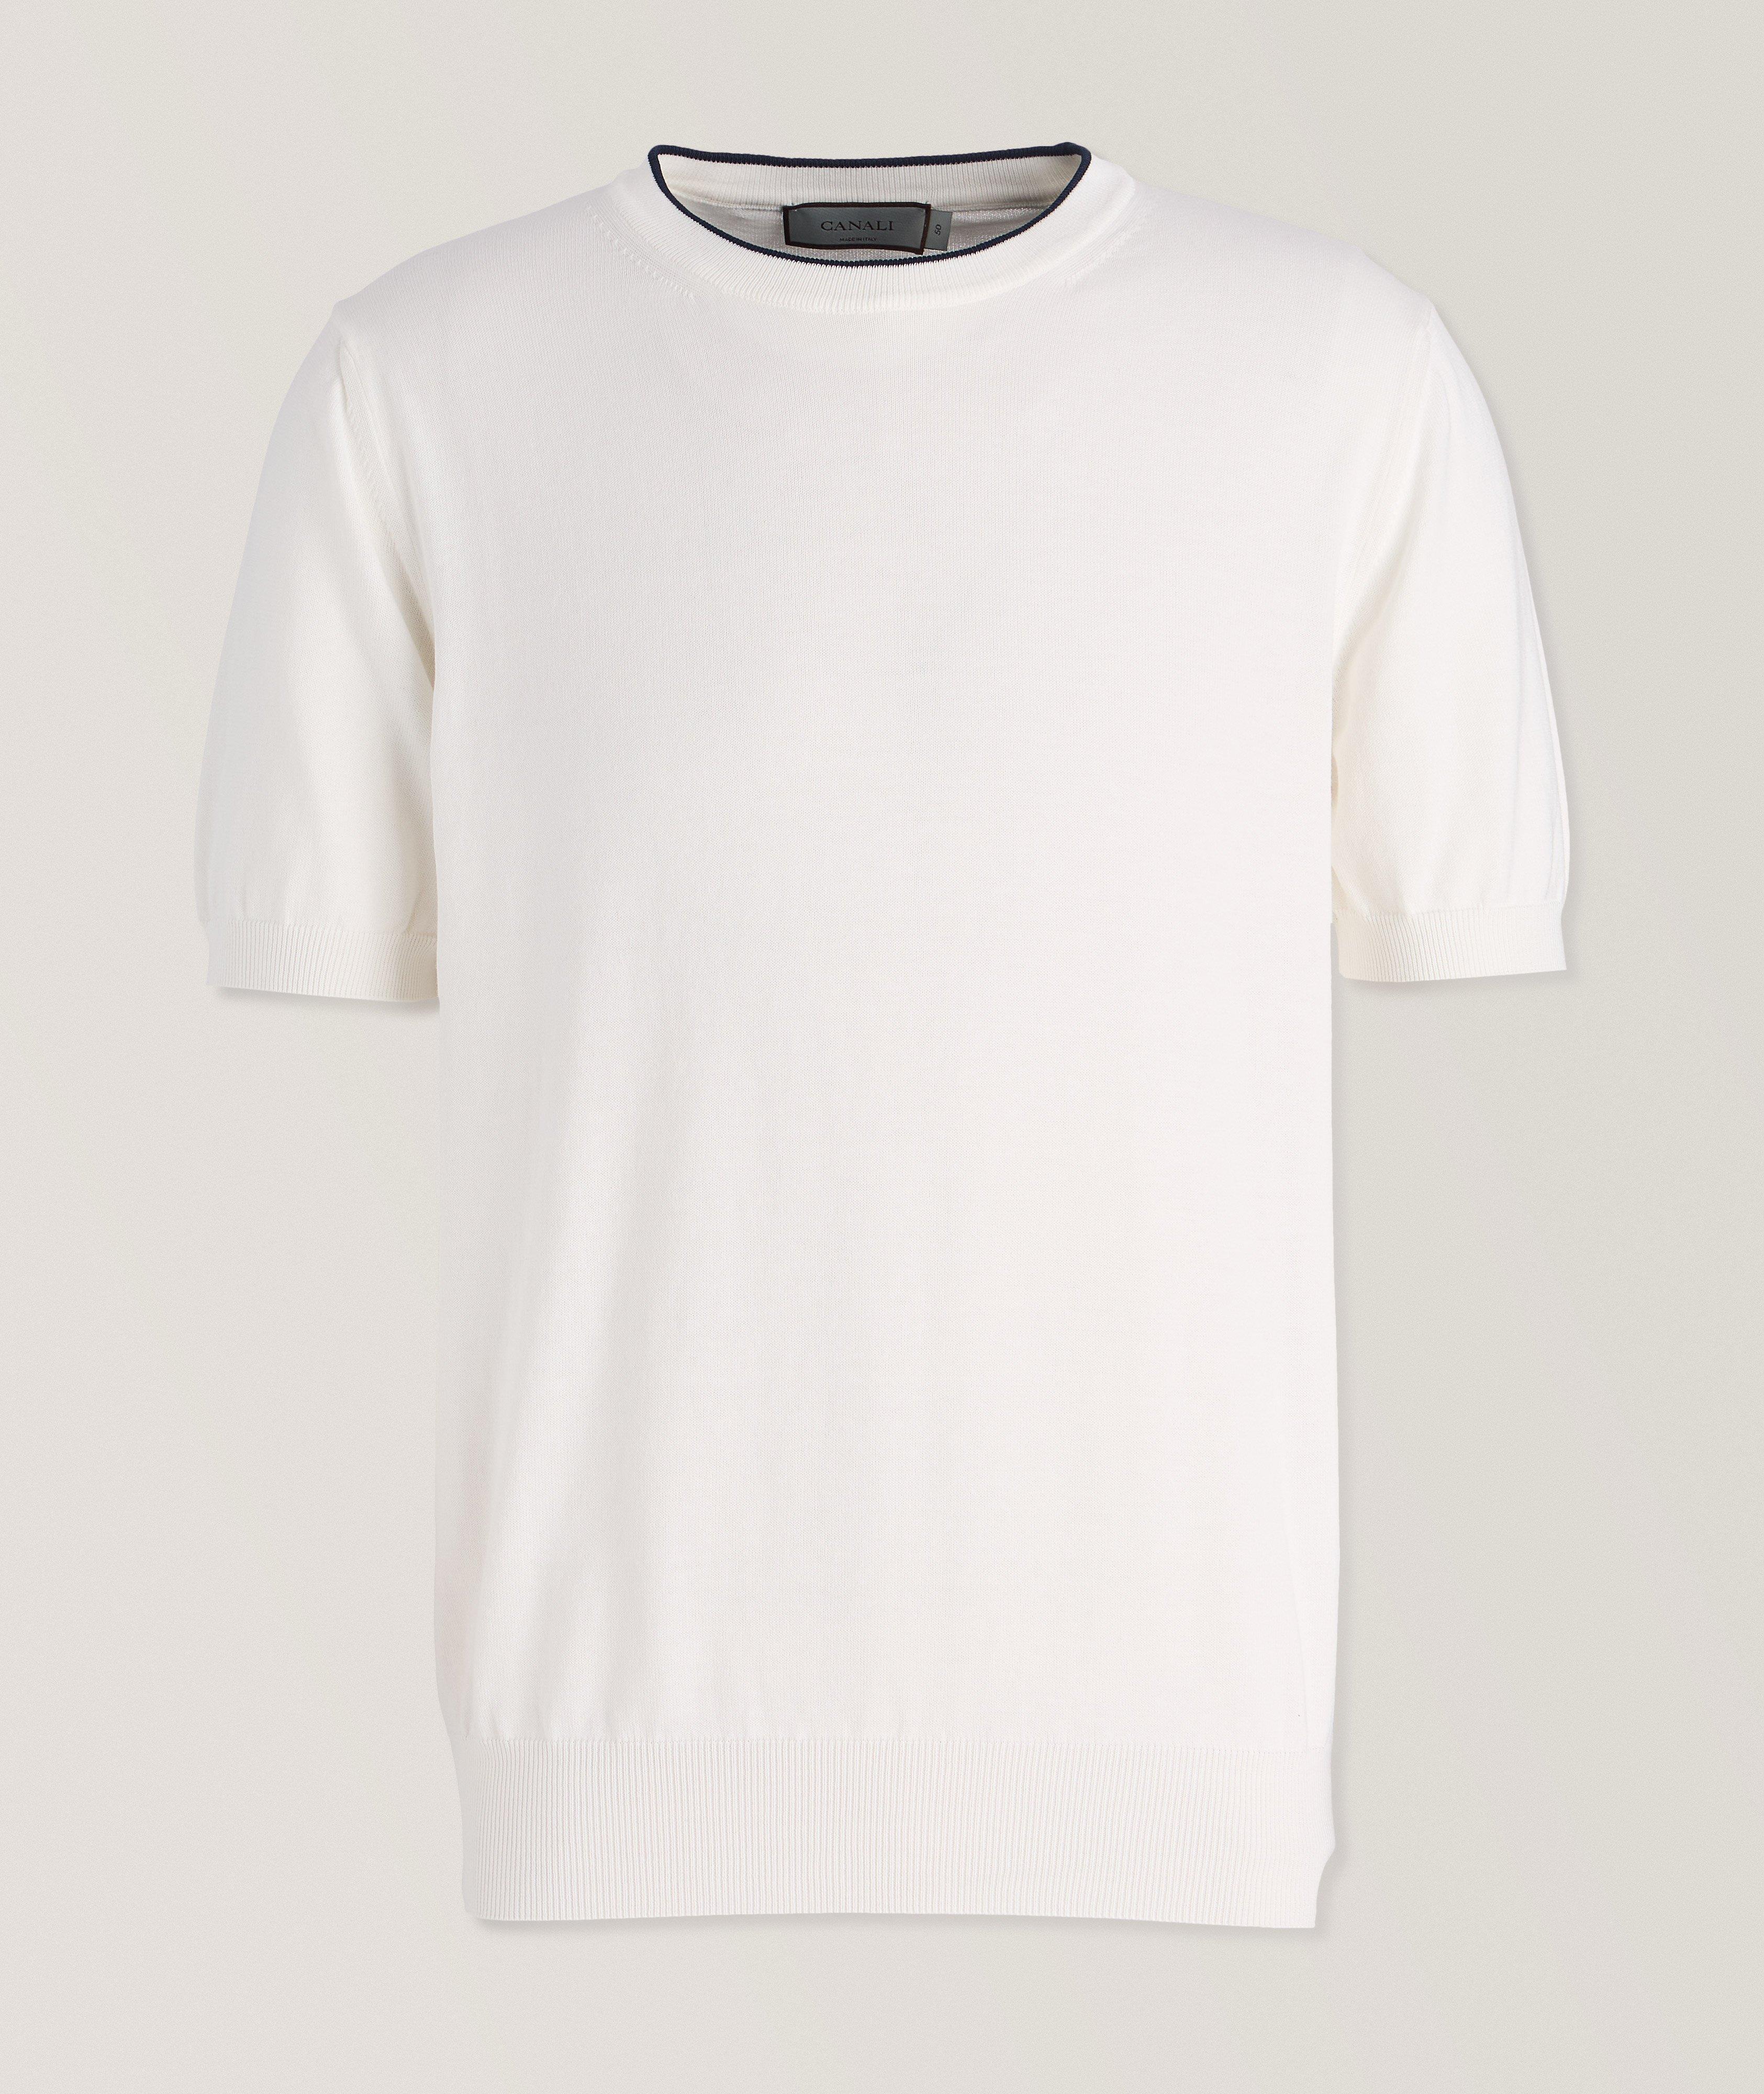 Contrast Tipped Cotton T-Shirt image 0